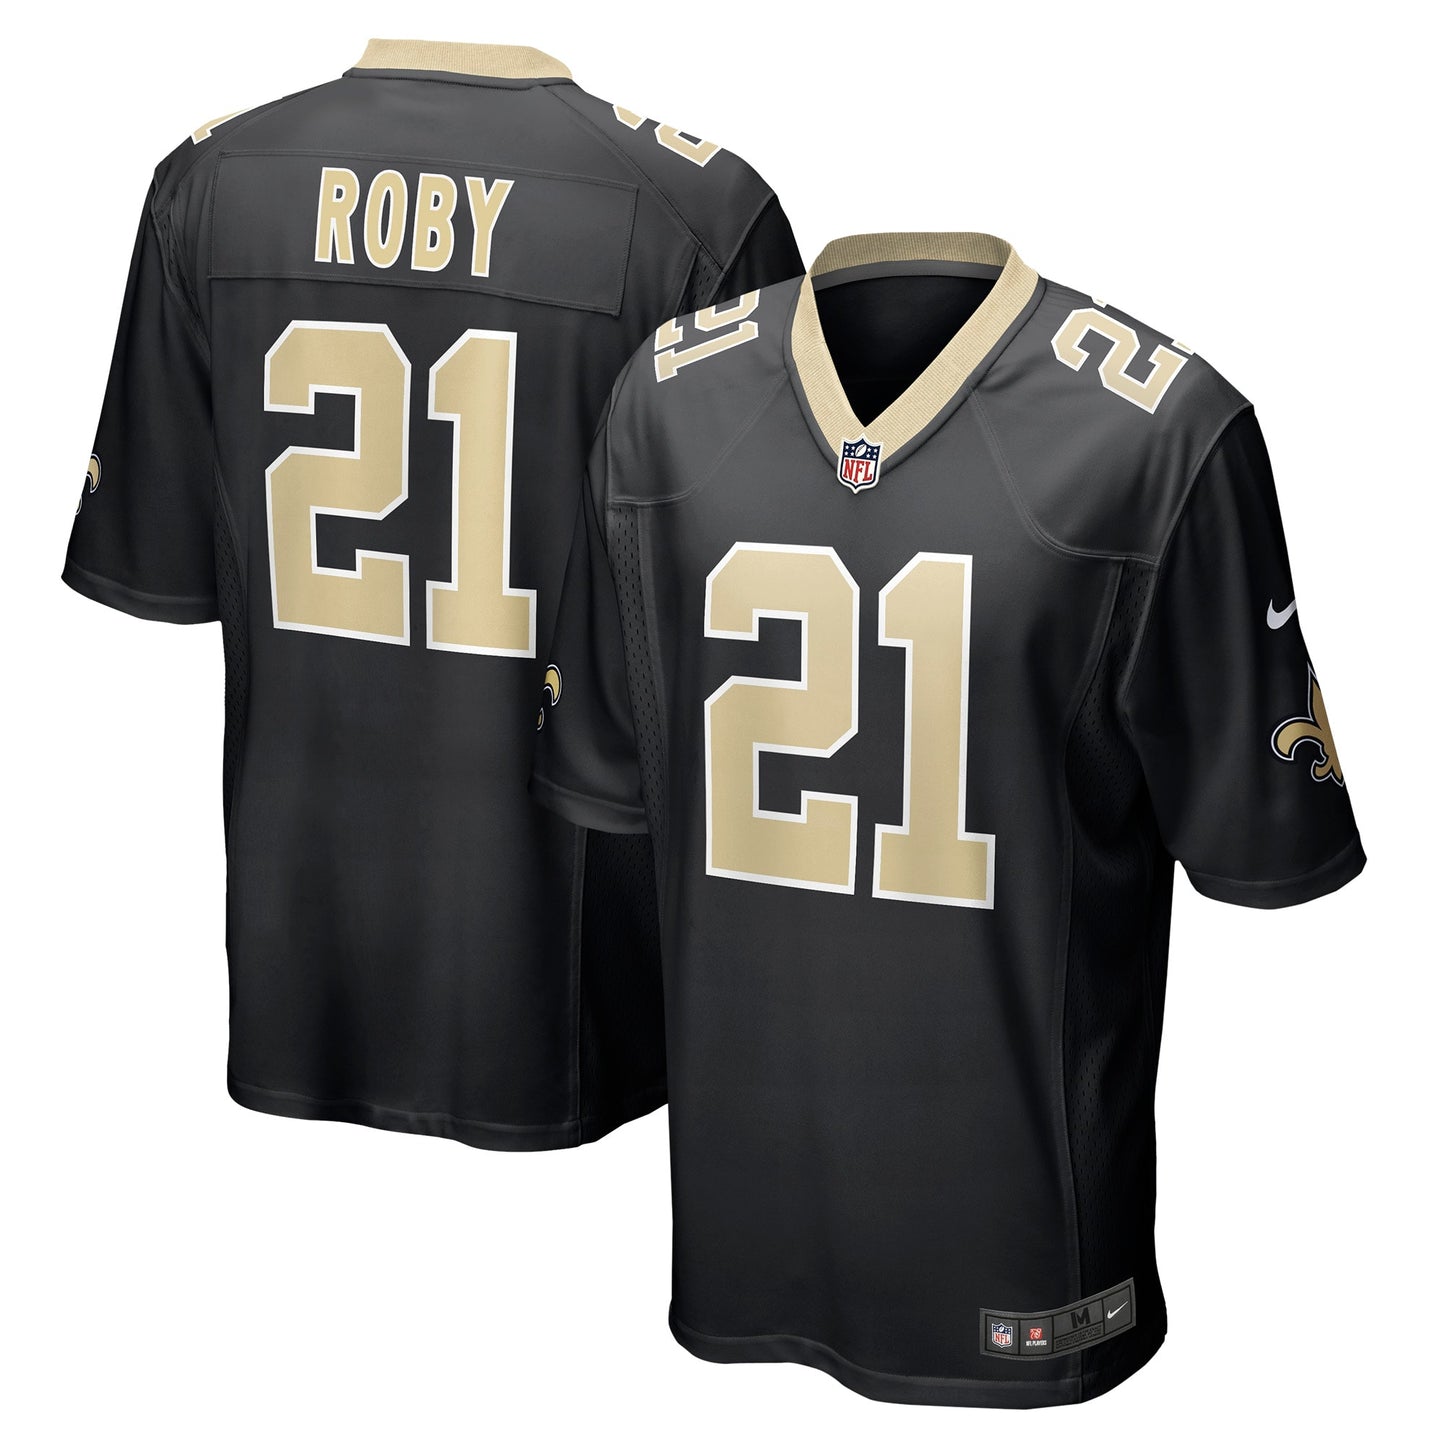 Bradley Roby New Orleans Saints Nike Game Jersey - Black